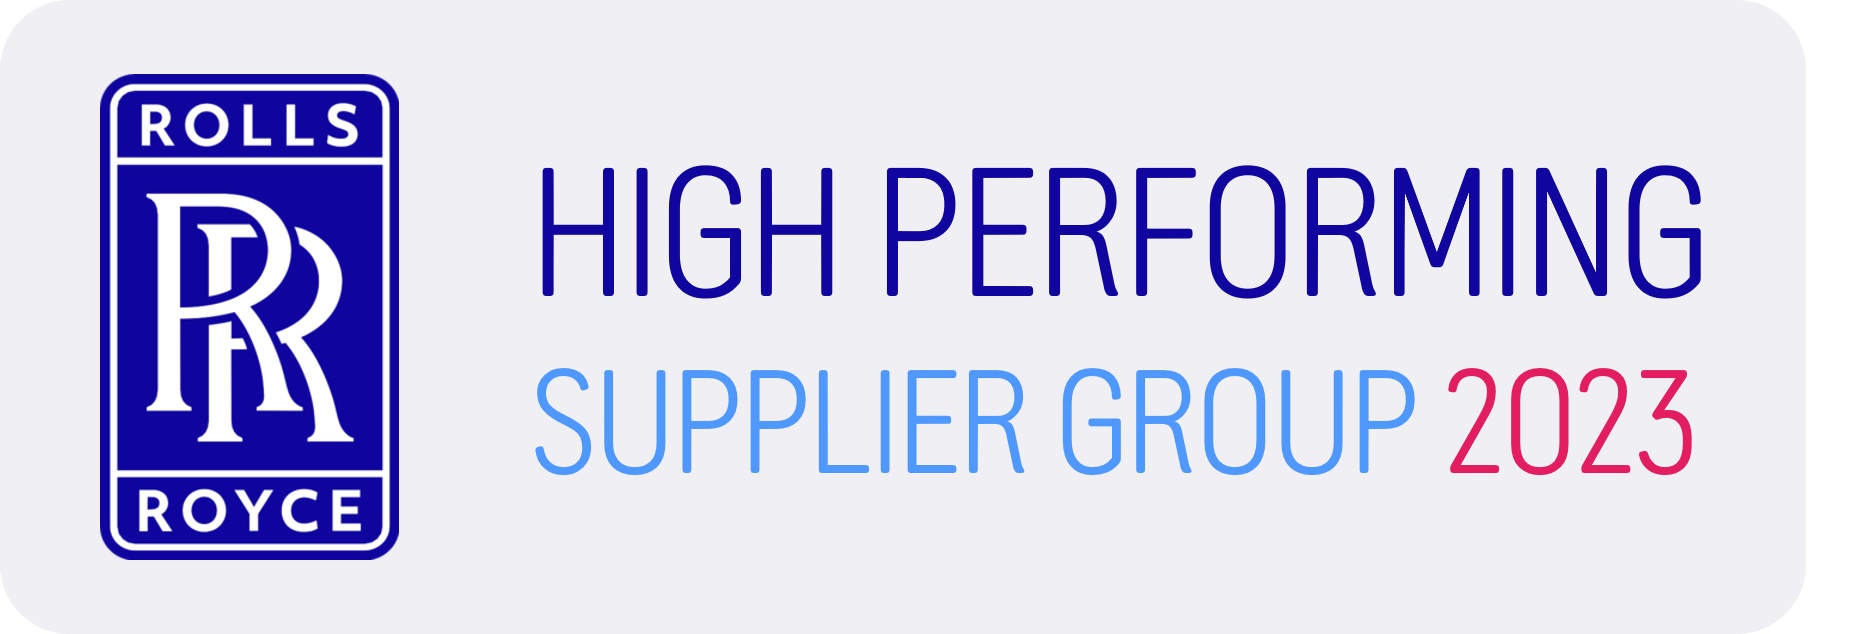 News - Ionix Systems is delighted to be confirmed as a member of the Rolls-Royce High Performing Supplier Group for another year.